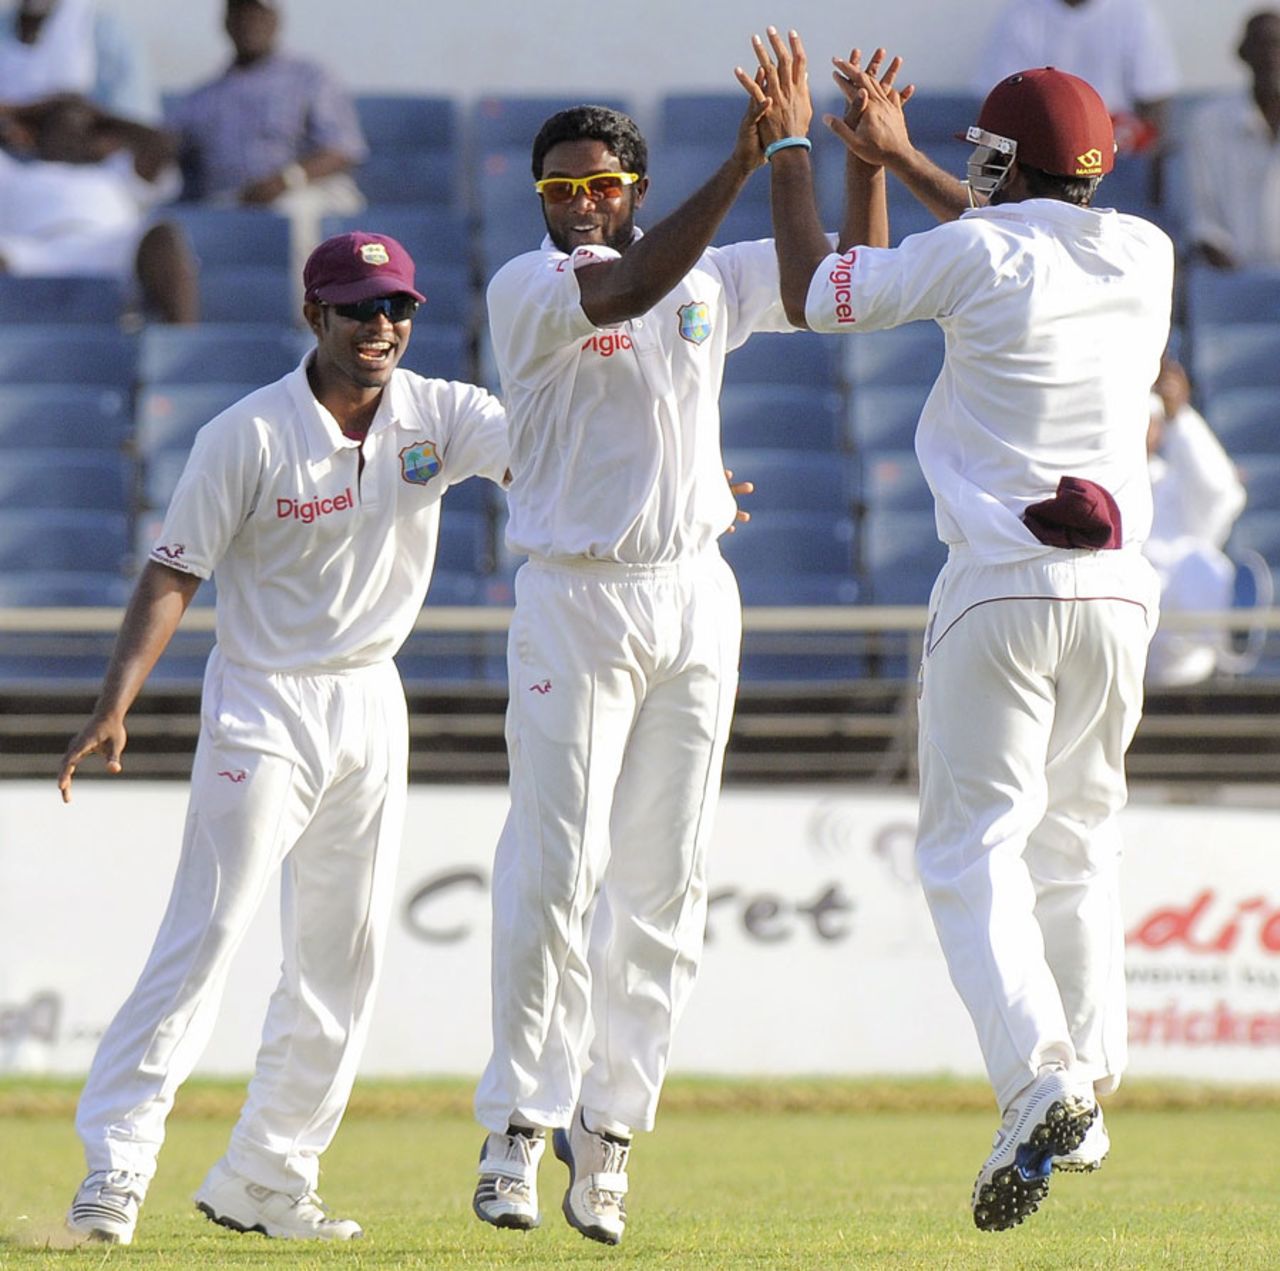 Narsingh Deonarine dismissed the New Zealand openers, West Indies v New Zealand, 2nd Test, Jamaica, 2nd day, August 3, 2012